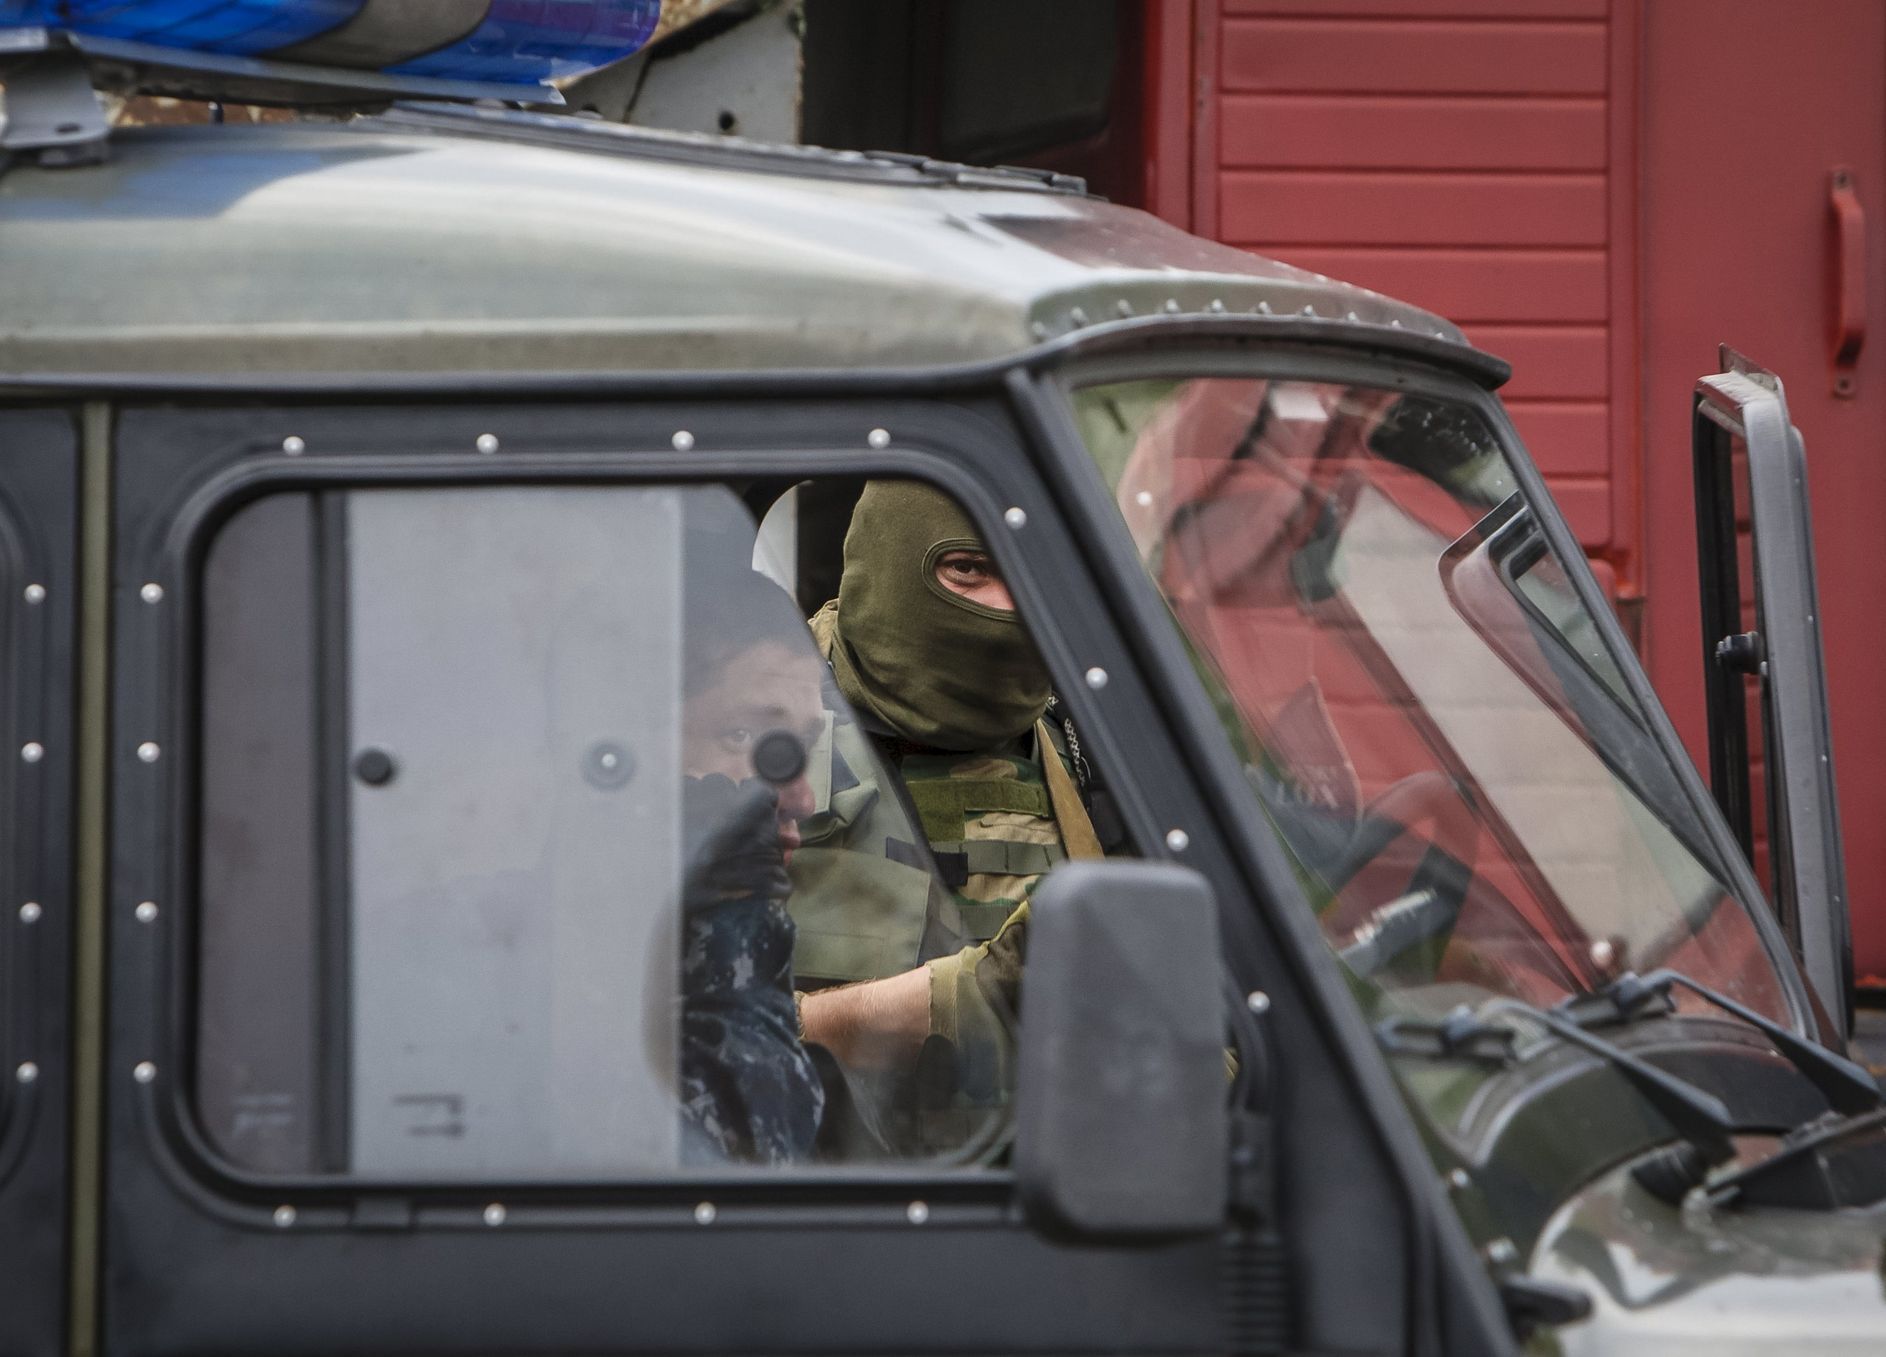 An interior ministry serviceman looks on as he stands at the scene of a shootout near Mukacheve